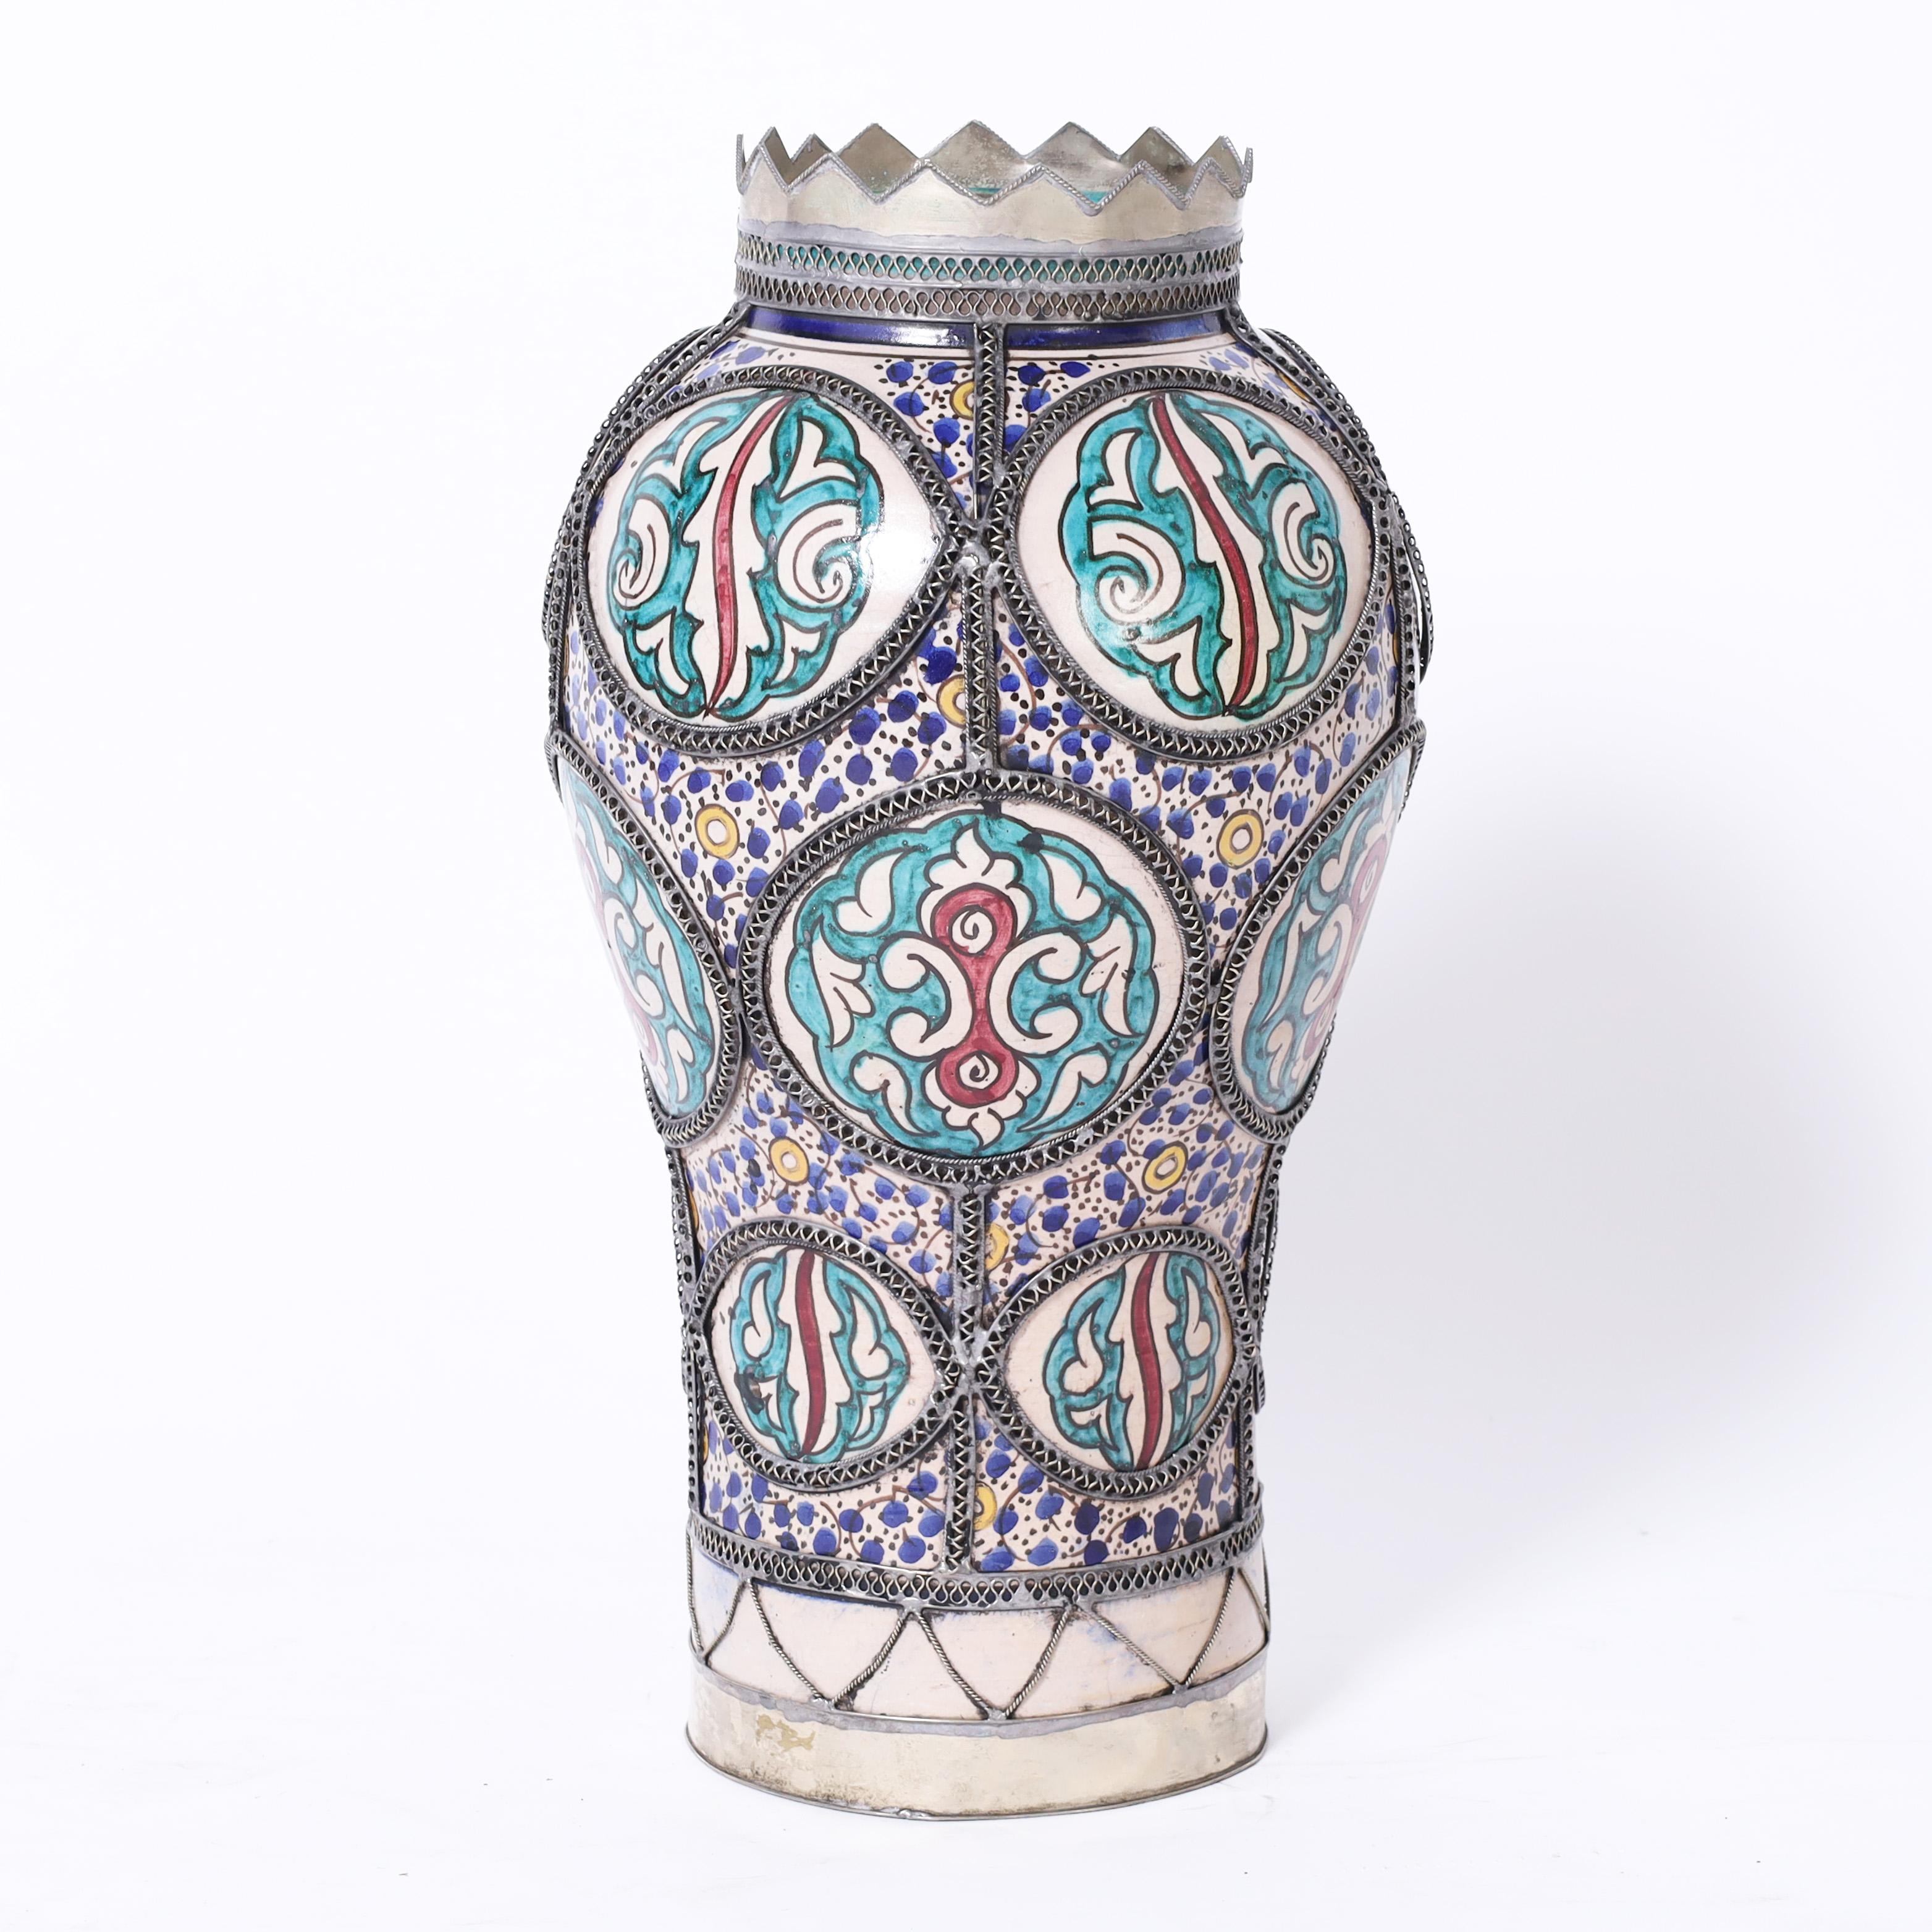 Standout Moroccan vase handcrafted in terracotta in classic form hand decorated on floral designs in distinctive Mediterranean colors under jewelry-like filigree metalwork.